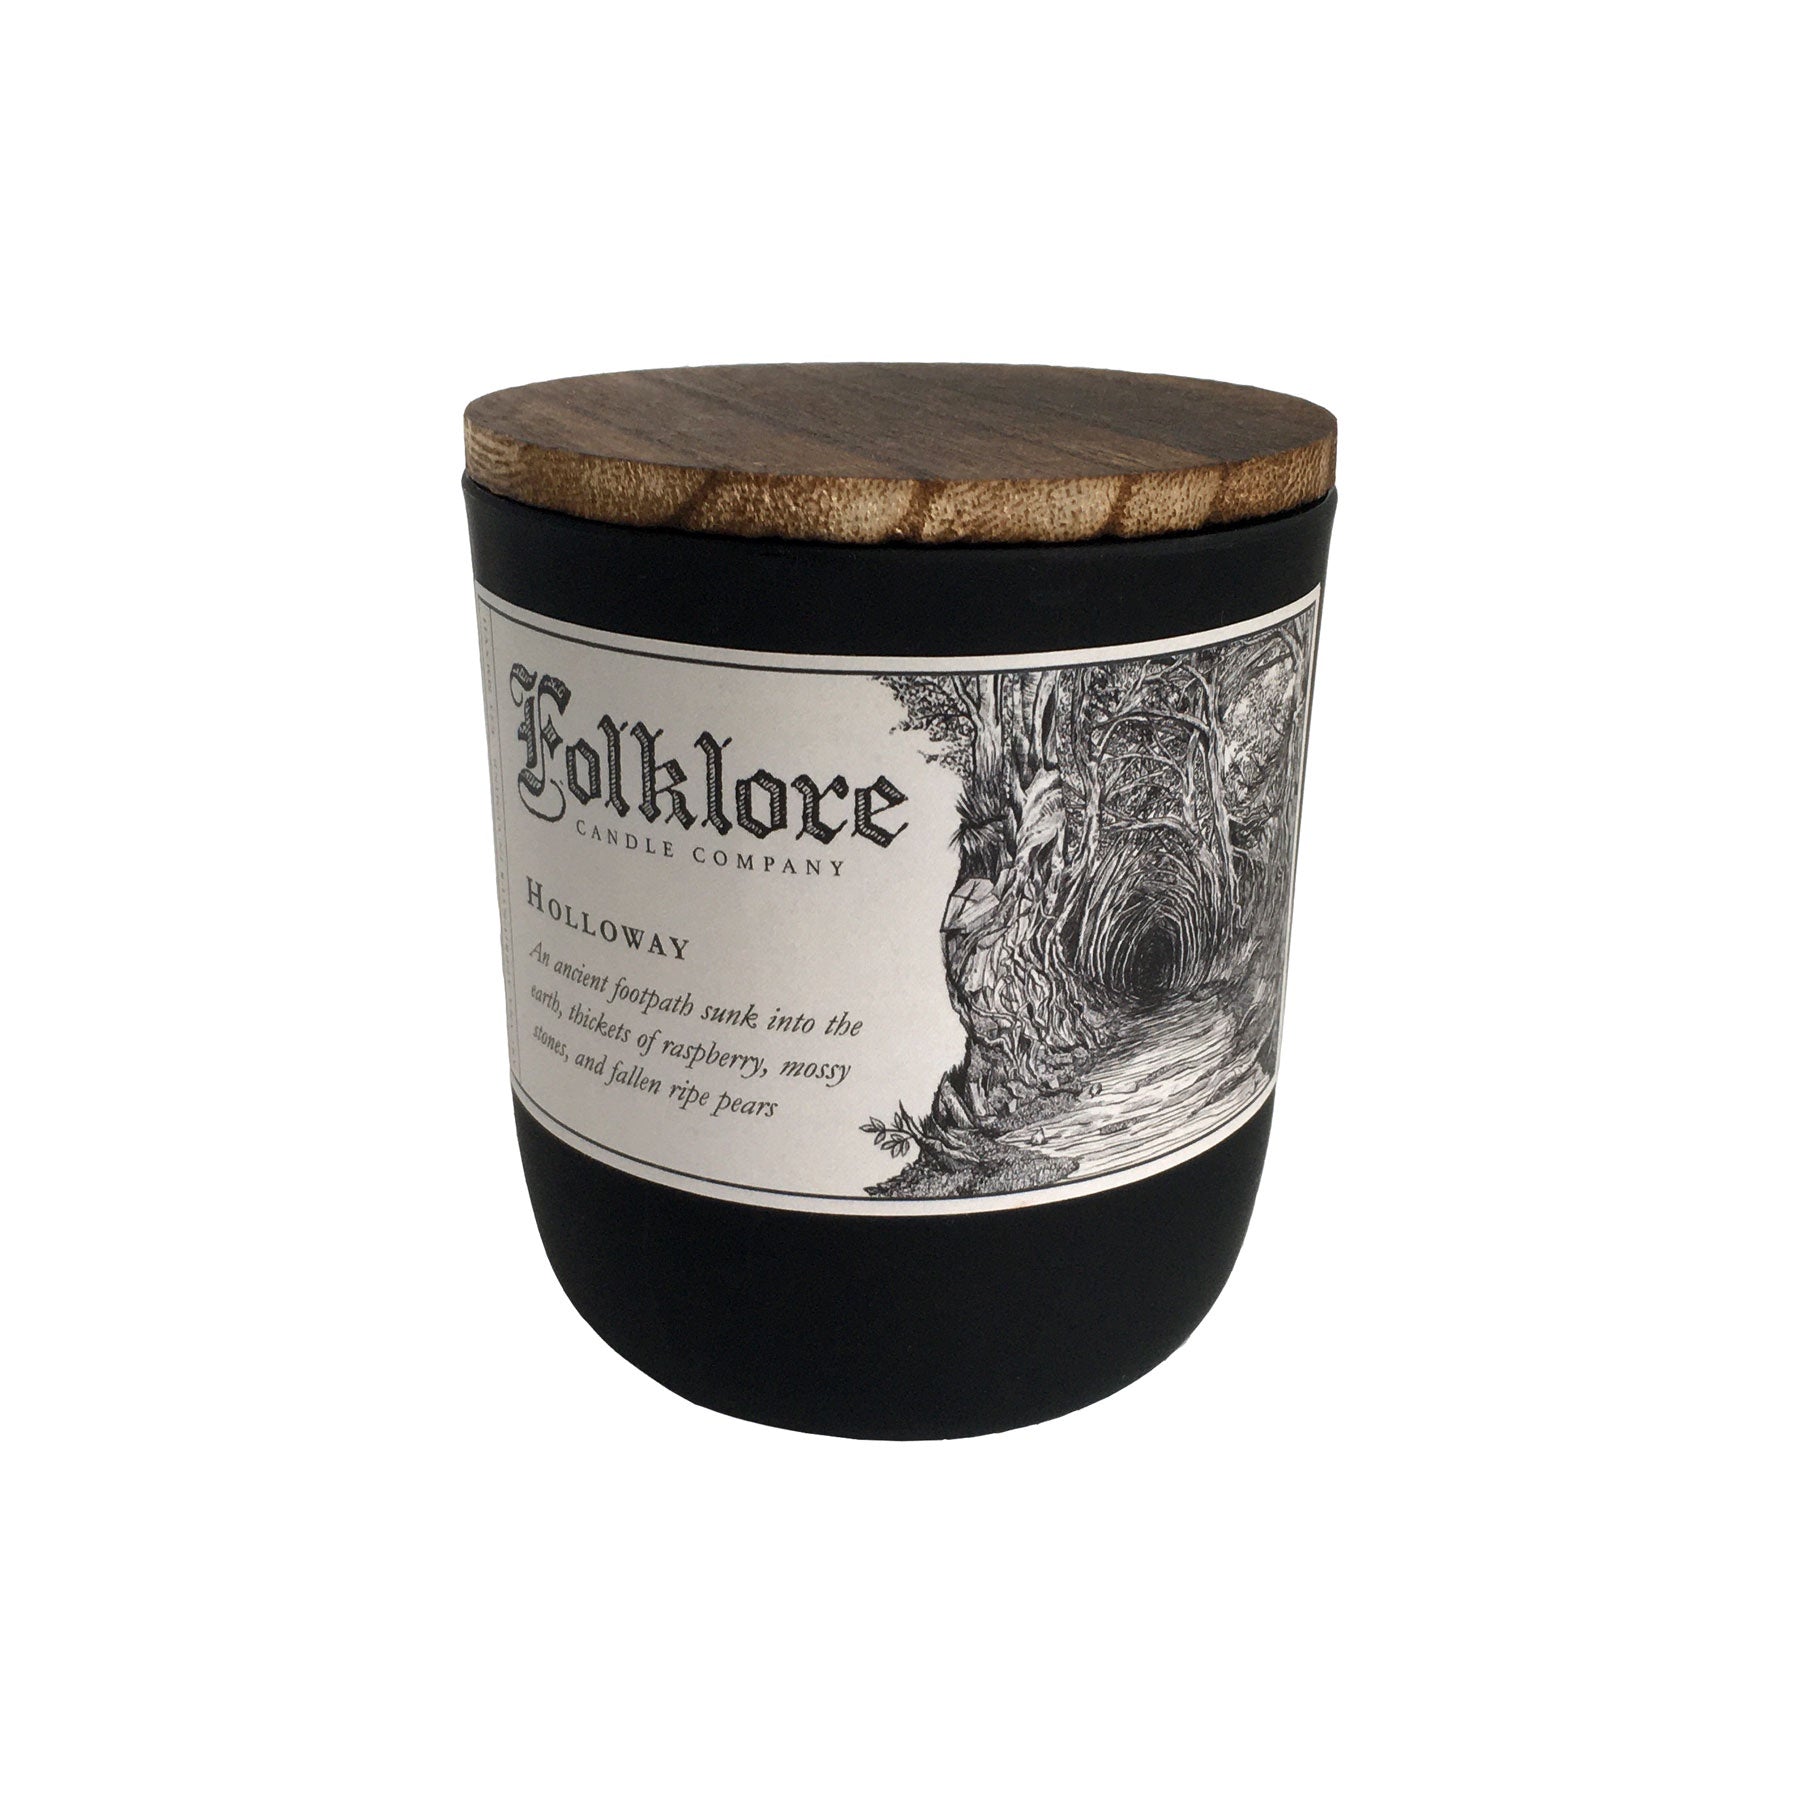 Holloway - Folklore Candle Company